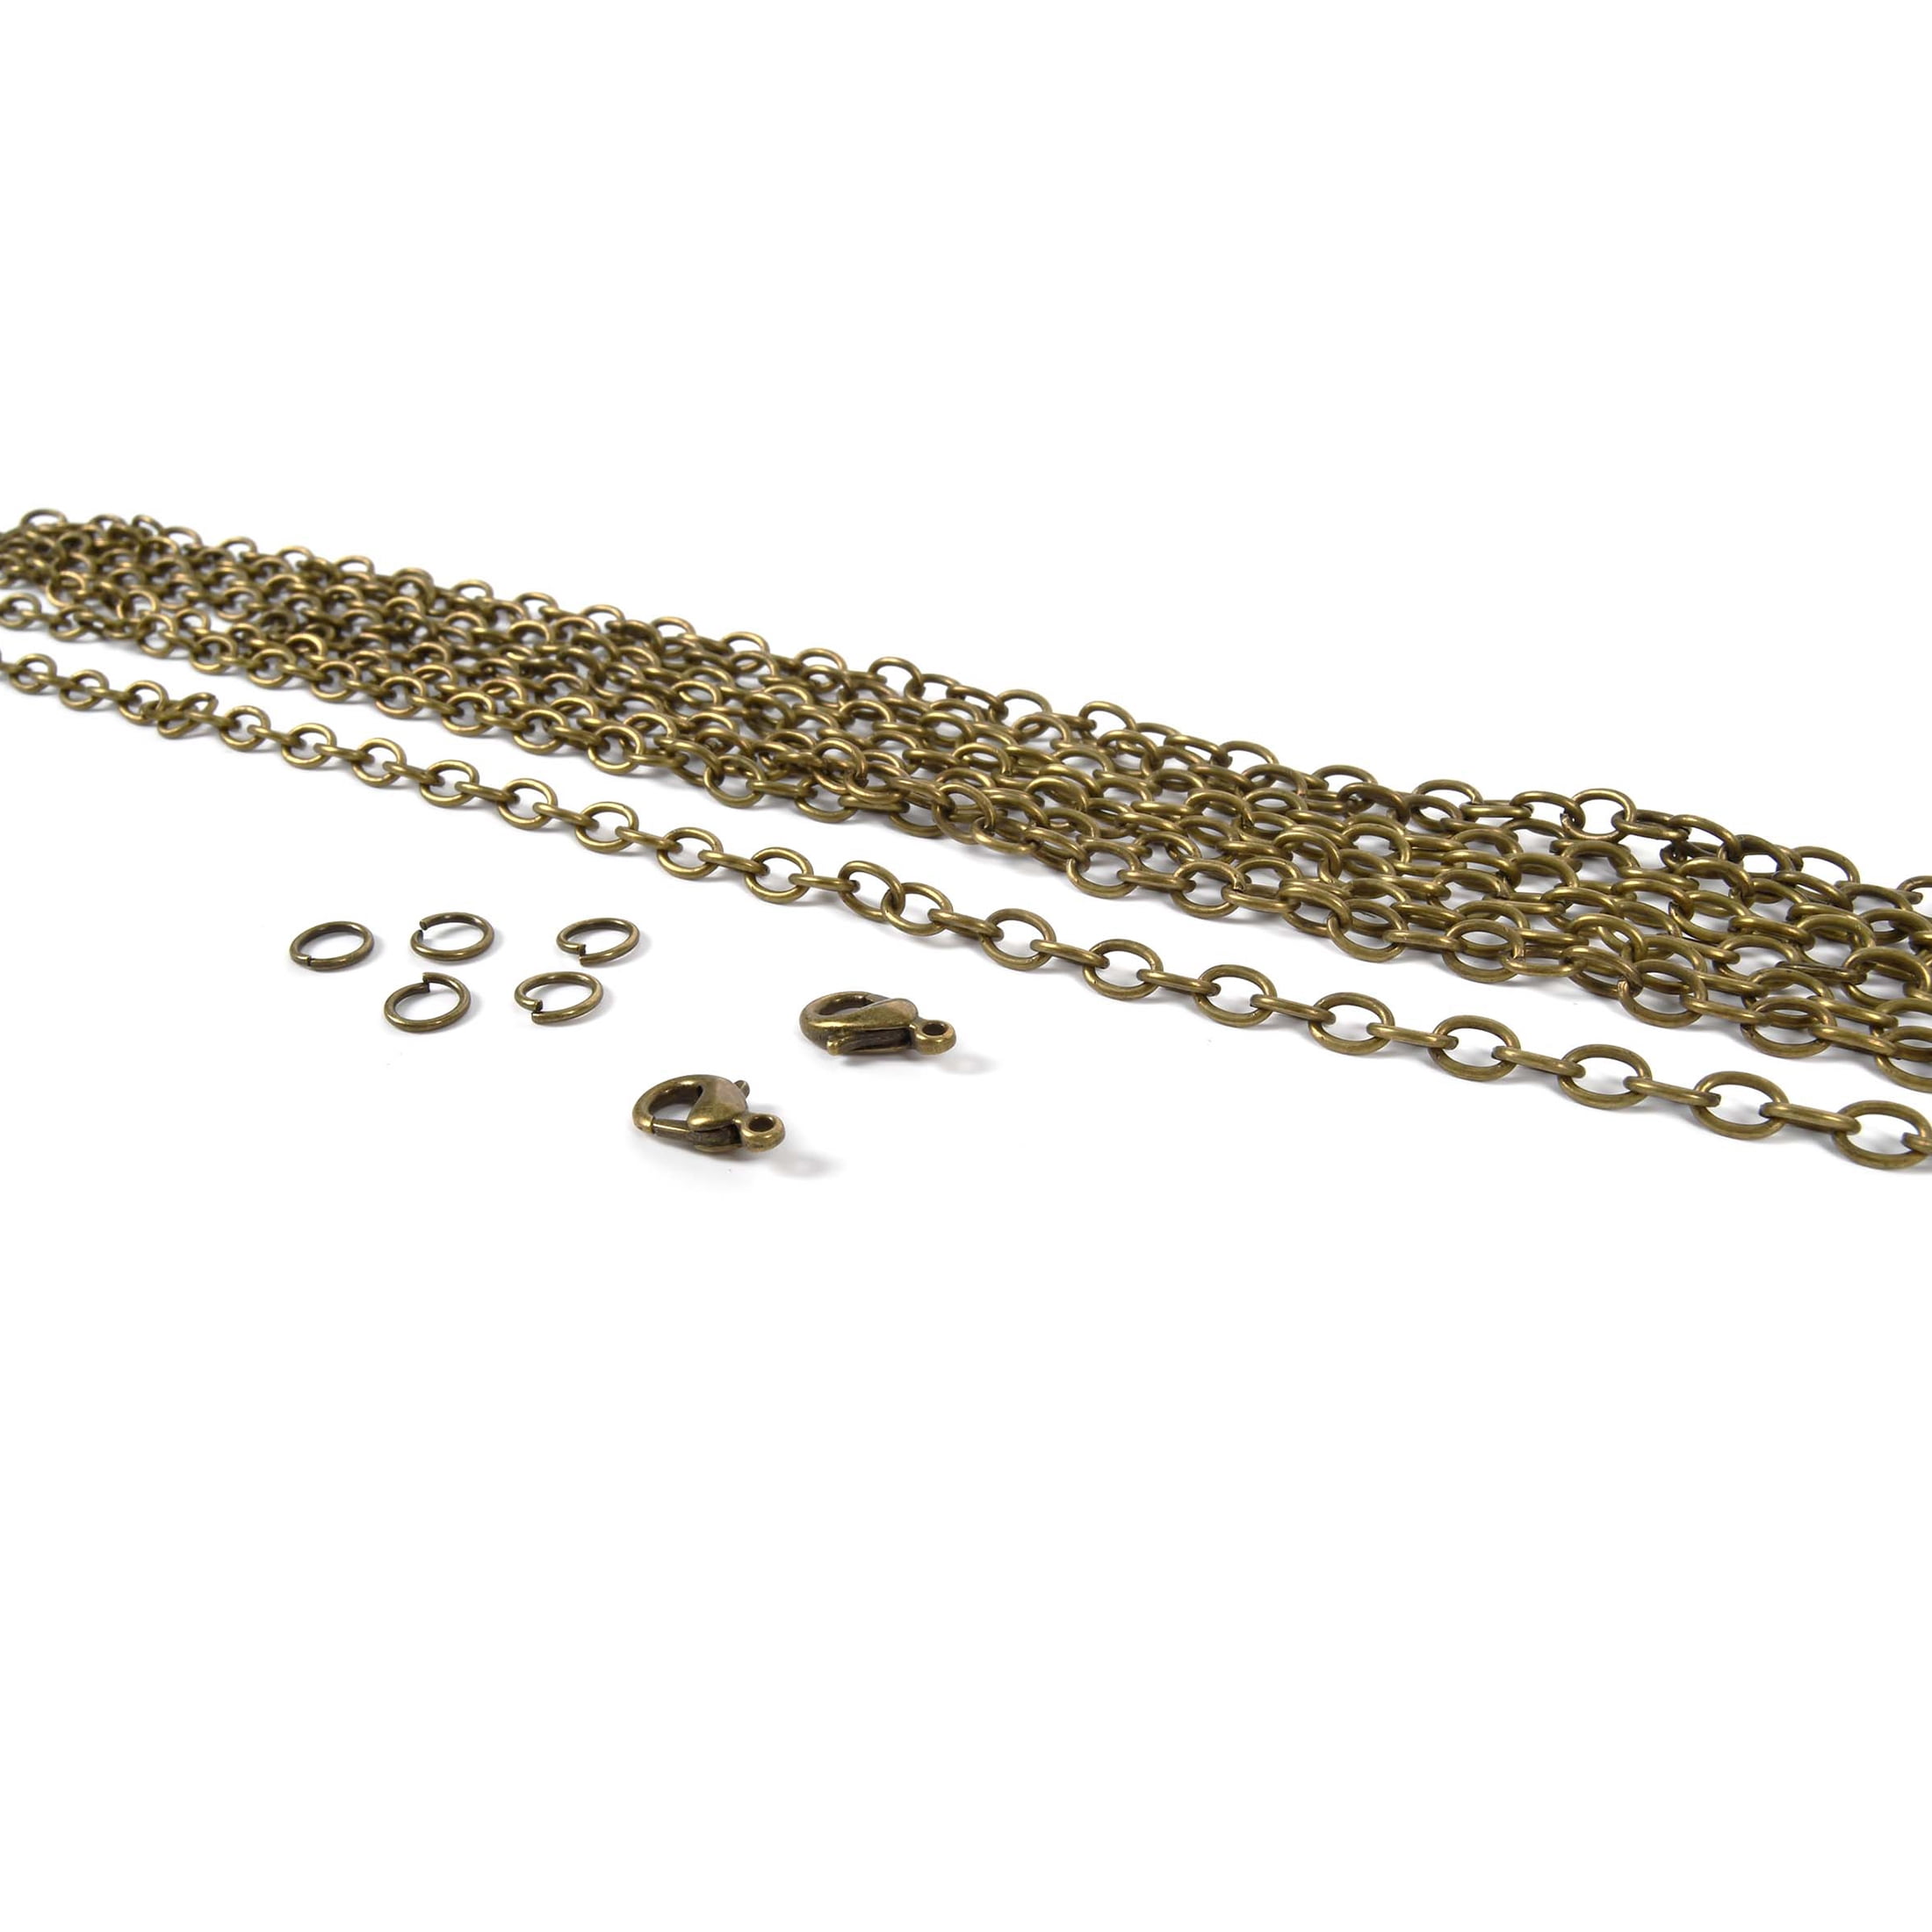 Blue Moon Beads Bronze Metal Oval Cable Chain for Jewelry Making, 18 inches  